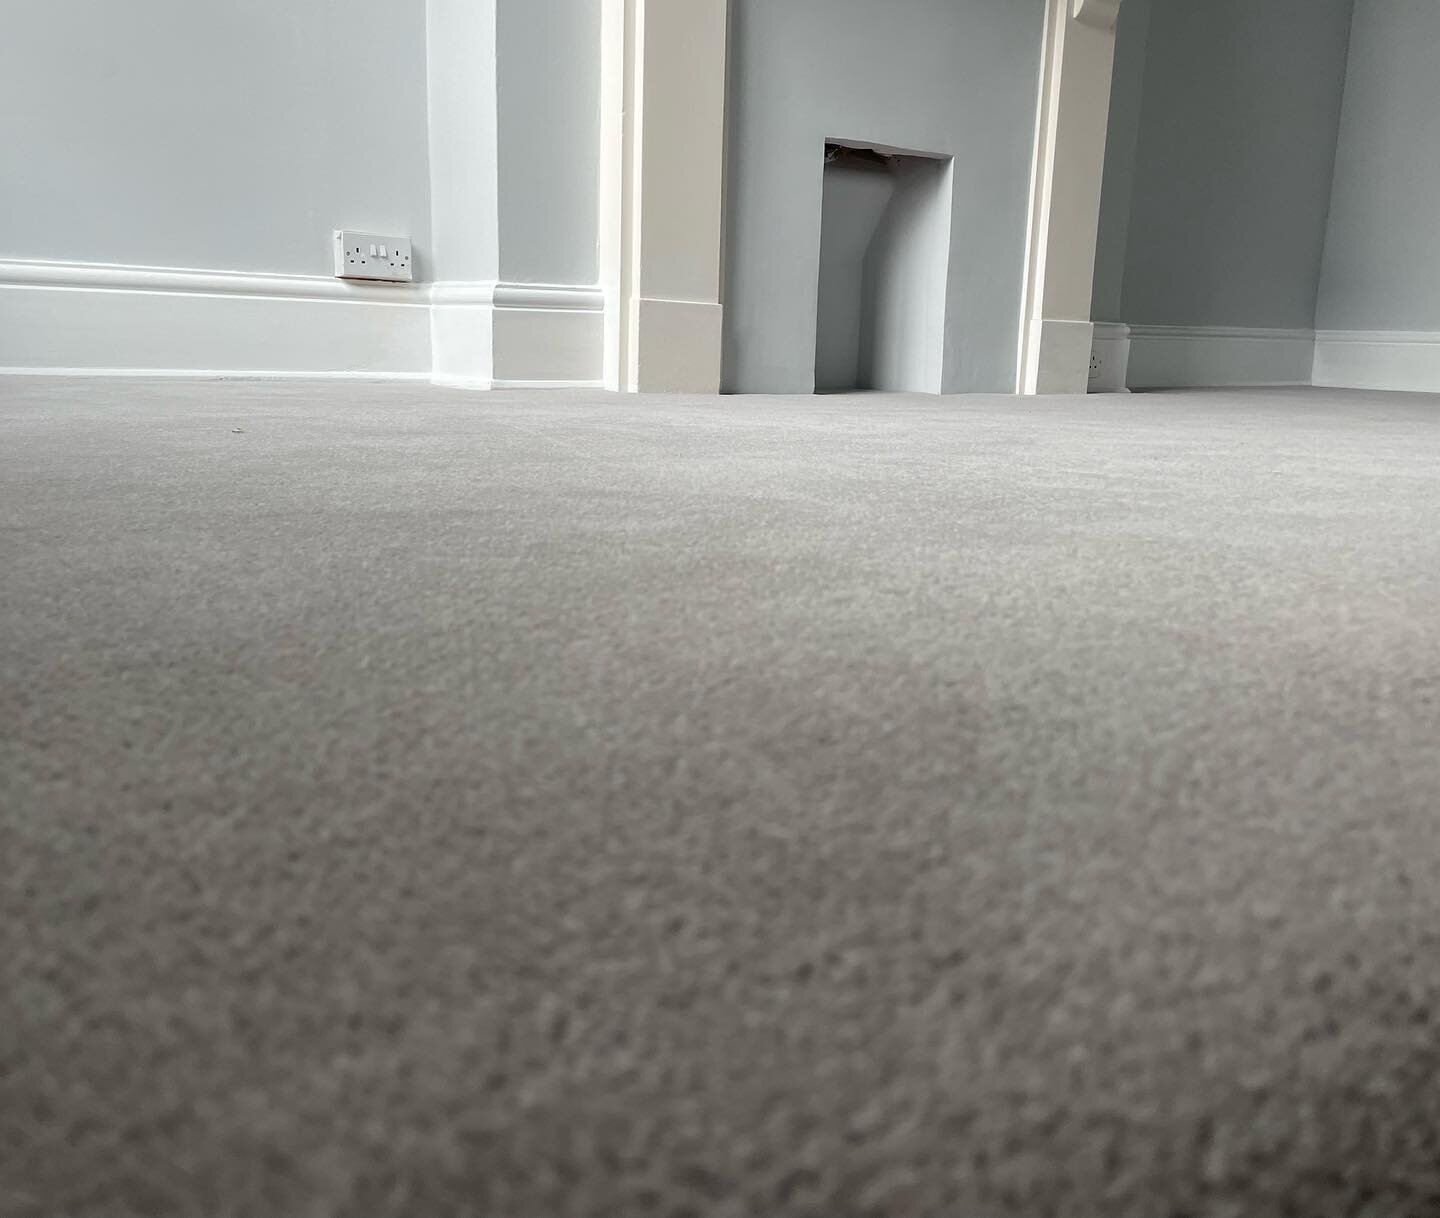 Bedroom, stairs &amp; dressing room in Cormar 50oz wool twist fitted recently for a lovely family in Leamington Spa 

_________________________

* Carpets
* LVT
* Laminate 
* Vinyl 
_________________________

* Free Advice &amp; Quotations
* 5 star r